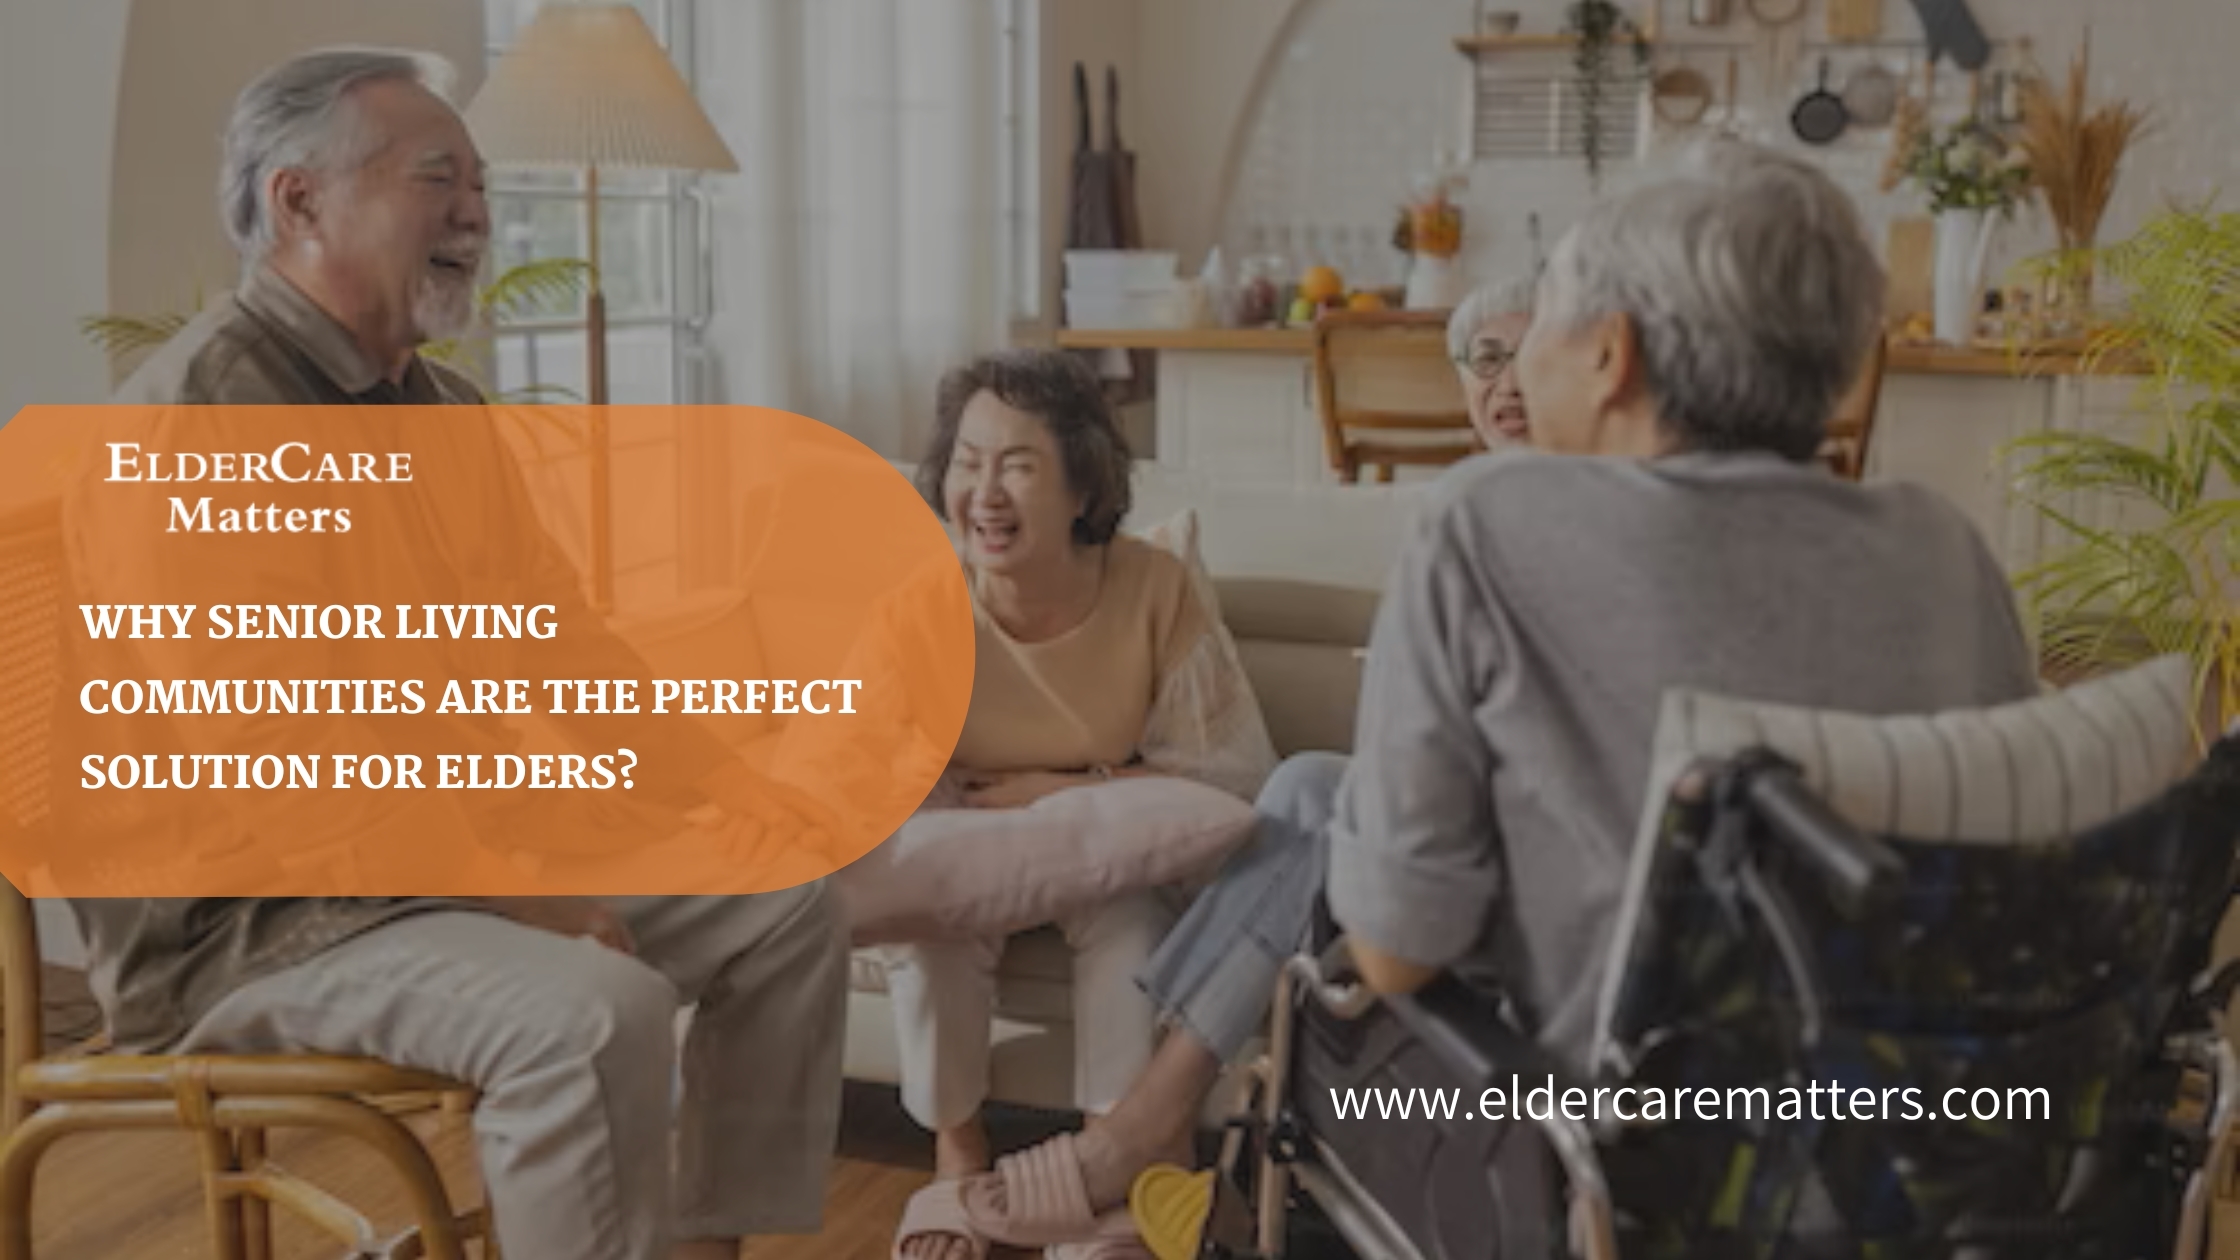 Why Senior Living Communities Are the Perfect Solution for Elders – Elder Care Matters Explains